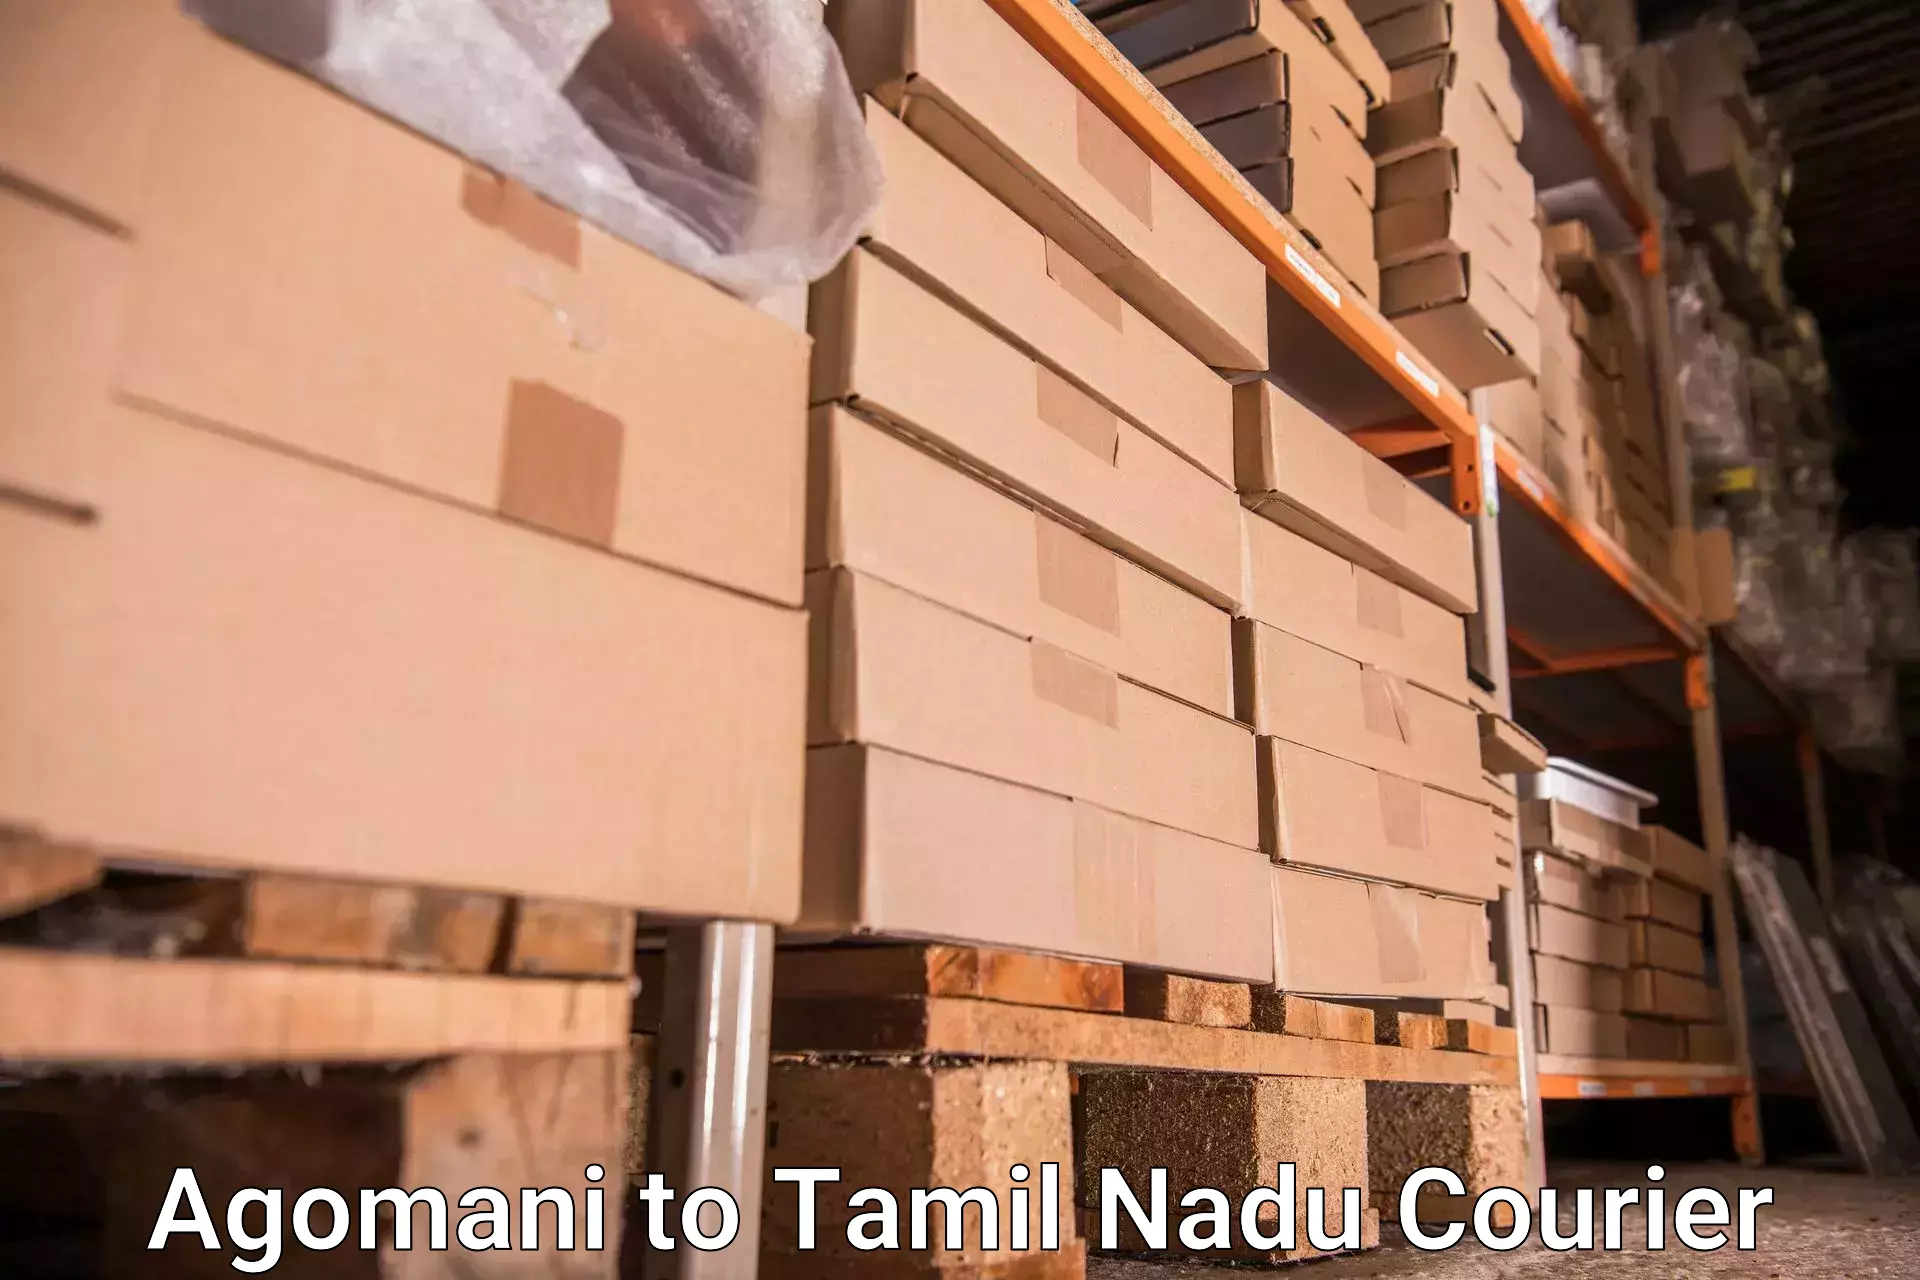 Instant baggage transport quote Agomani to Thuraiyur